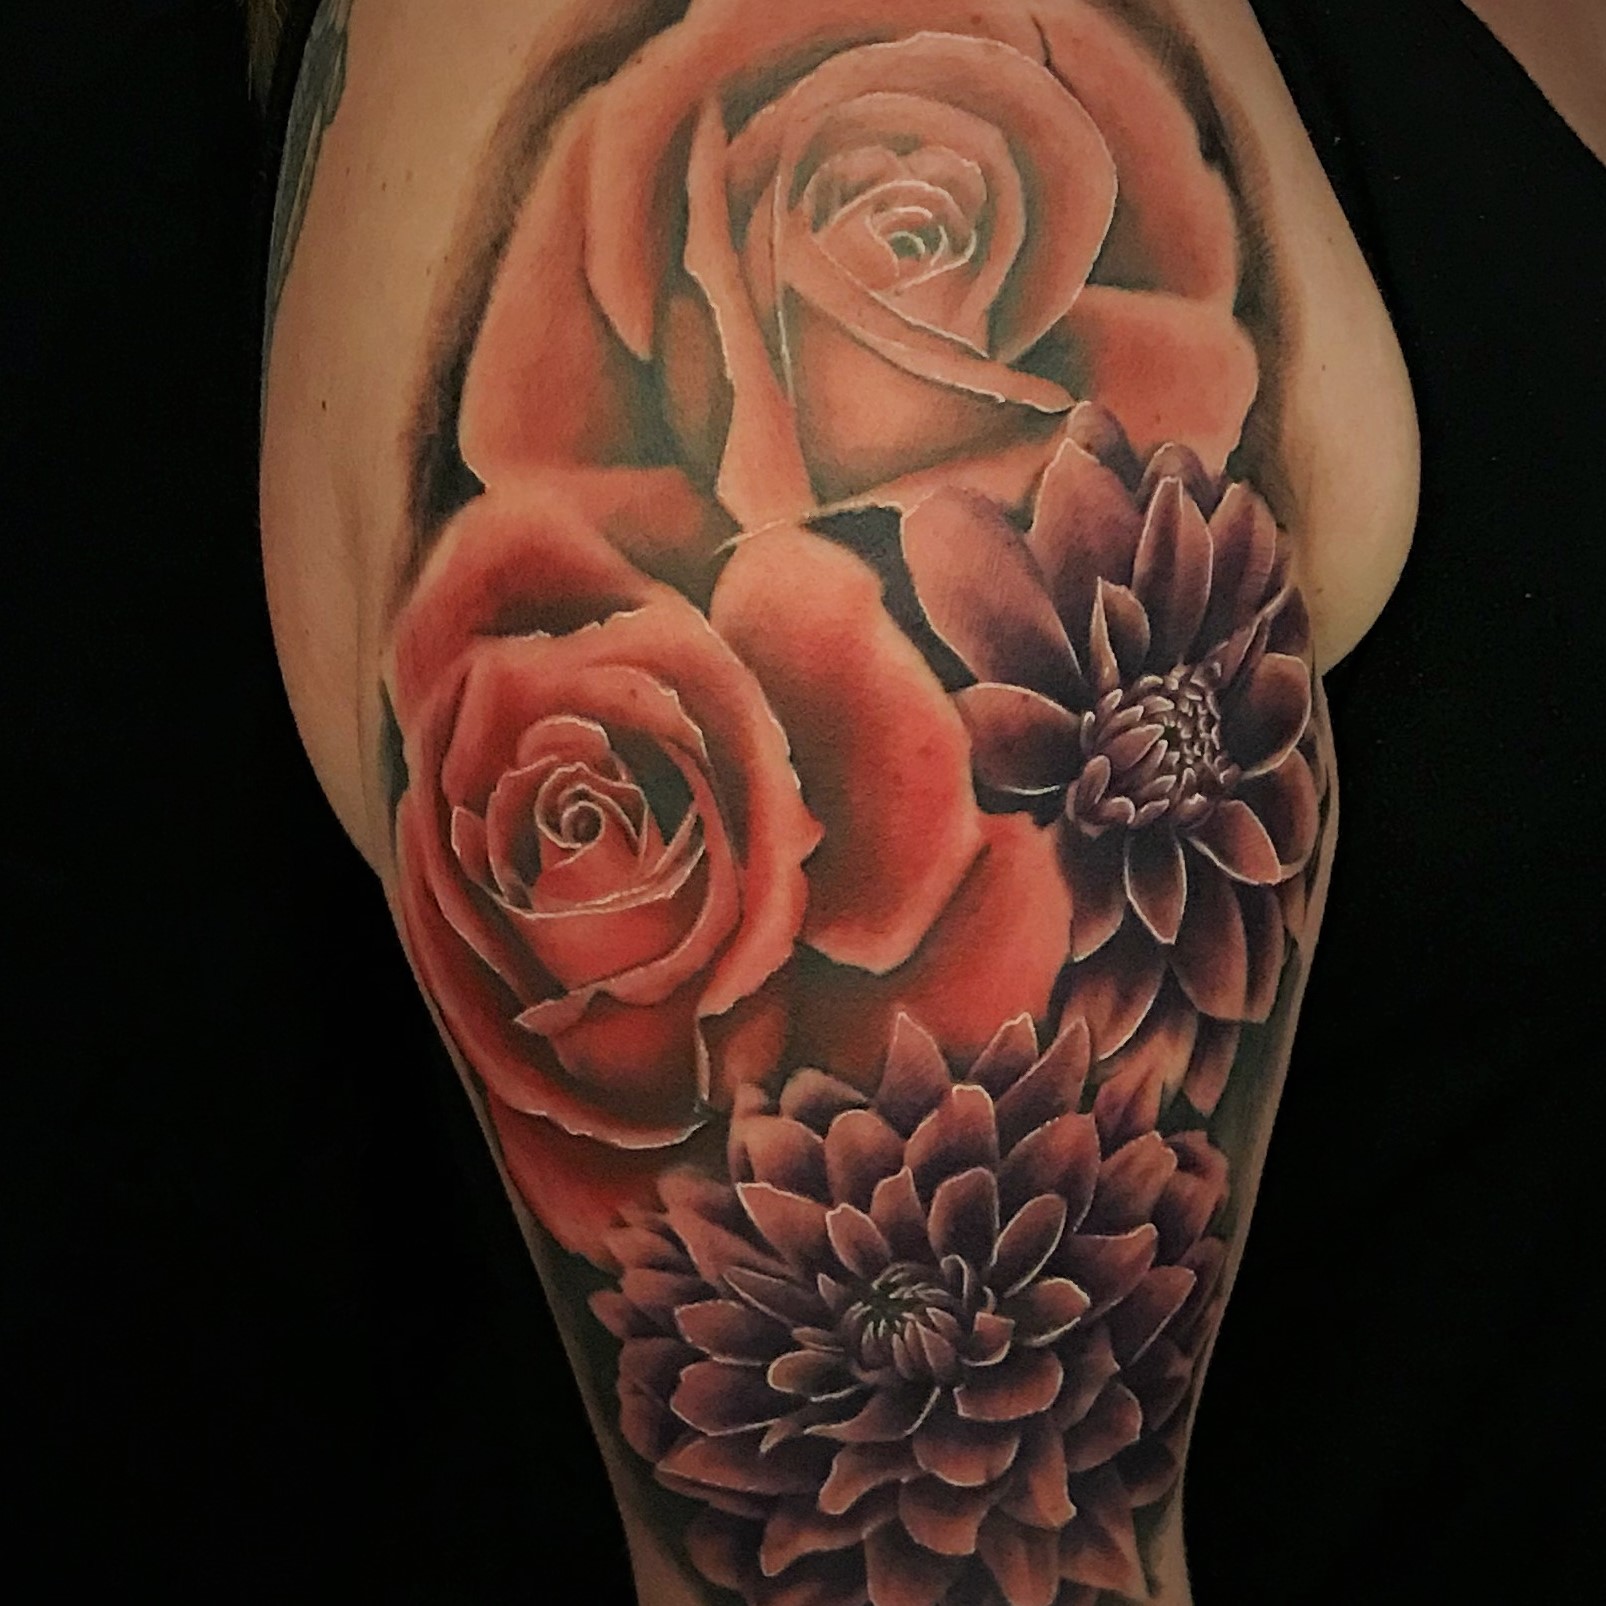 Pink Roses and Purple Dahlia flower upper arm and shoulder tattoo created by tattoo artist Alan Lott of Sacred Mandala Studio in Durham, NC.